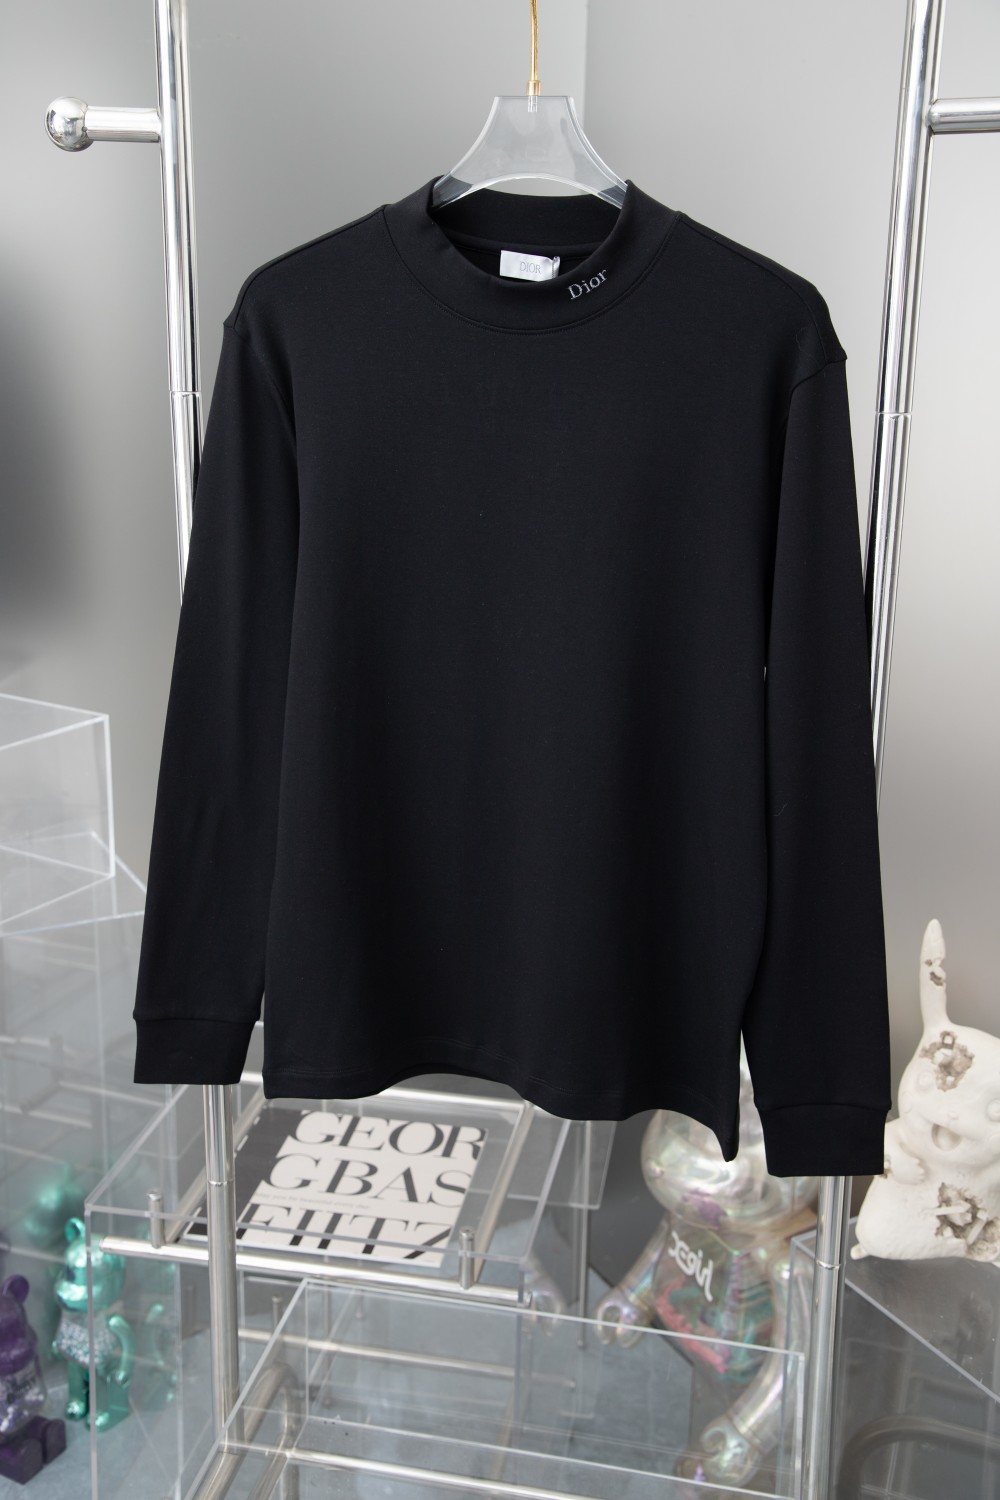 Dior Clothing T-Shirt Black White Embroidery Cotton Fall/Winter Collection Fashion Long Sleeve